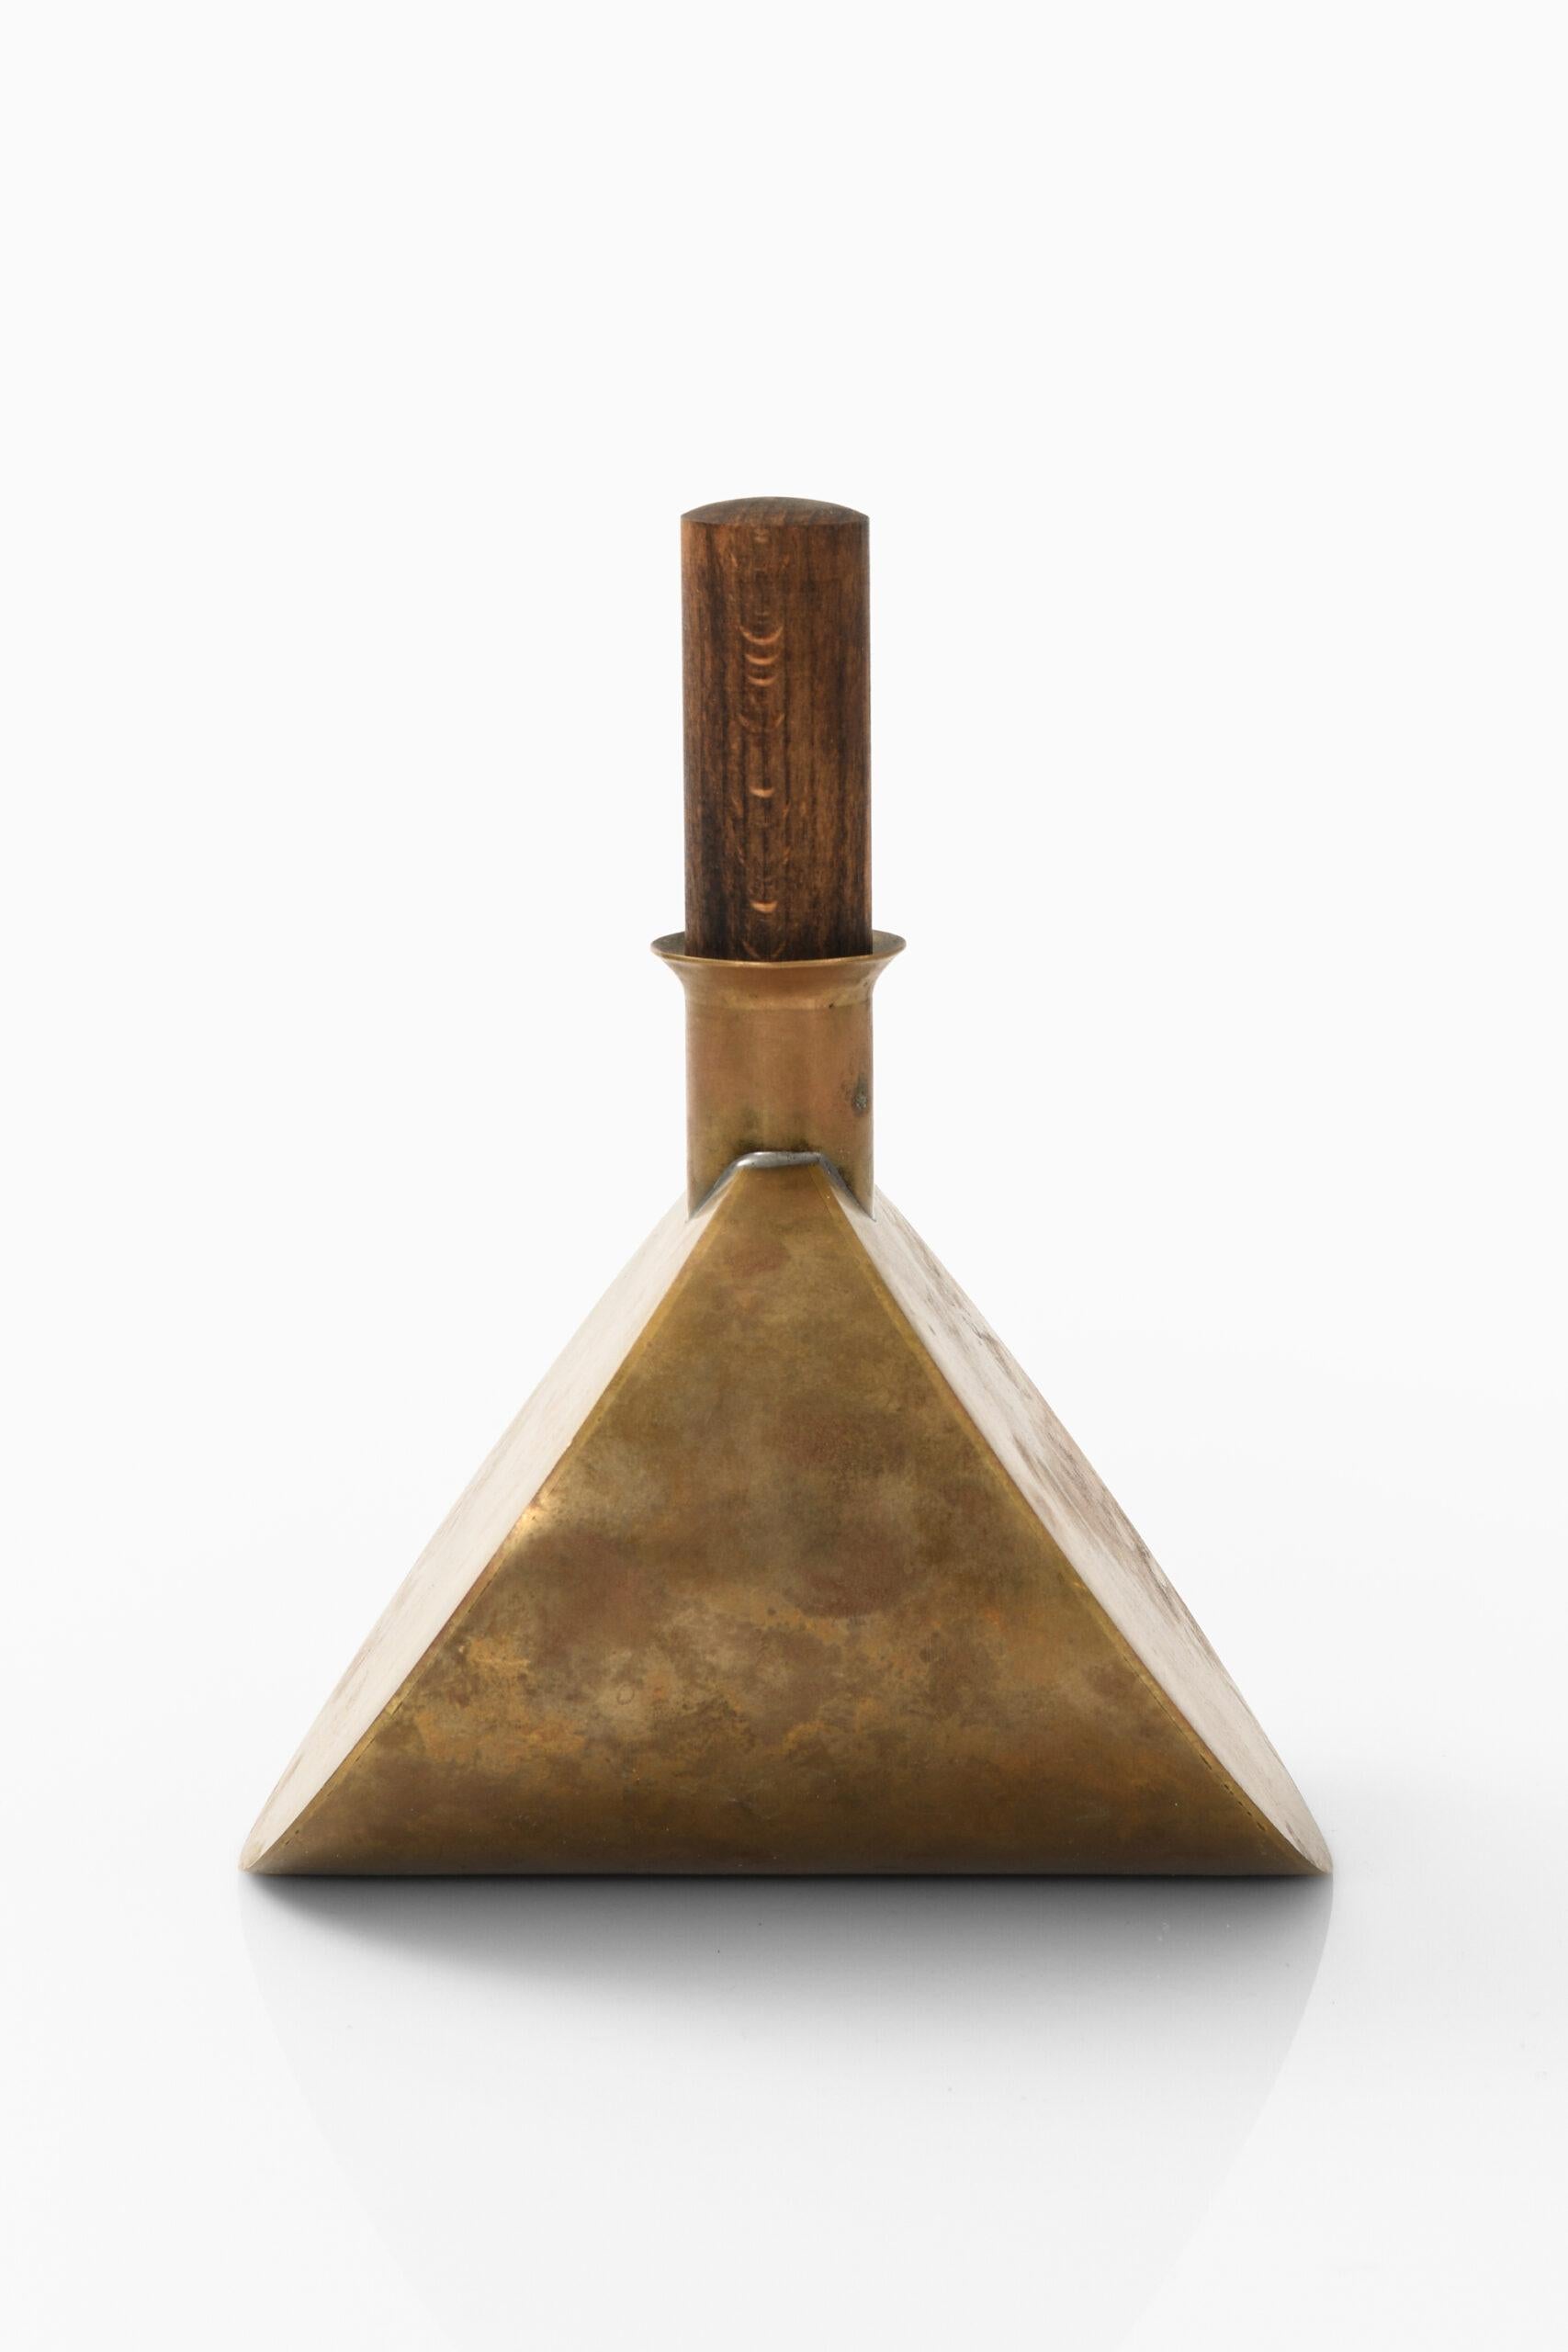 Decanter designed by Pierre Forsell. Produced by Skultuna in Sweden.